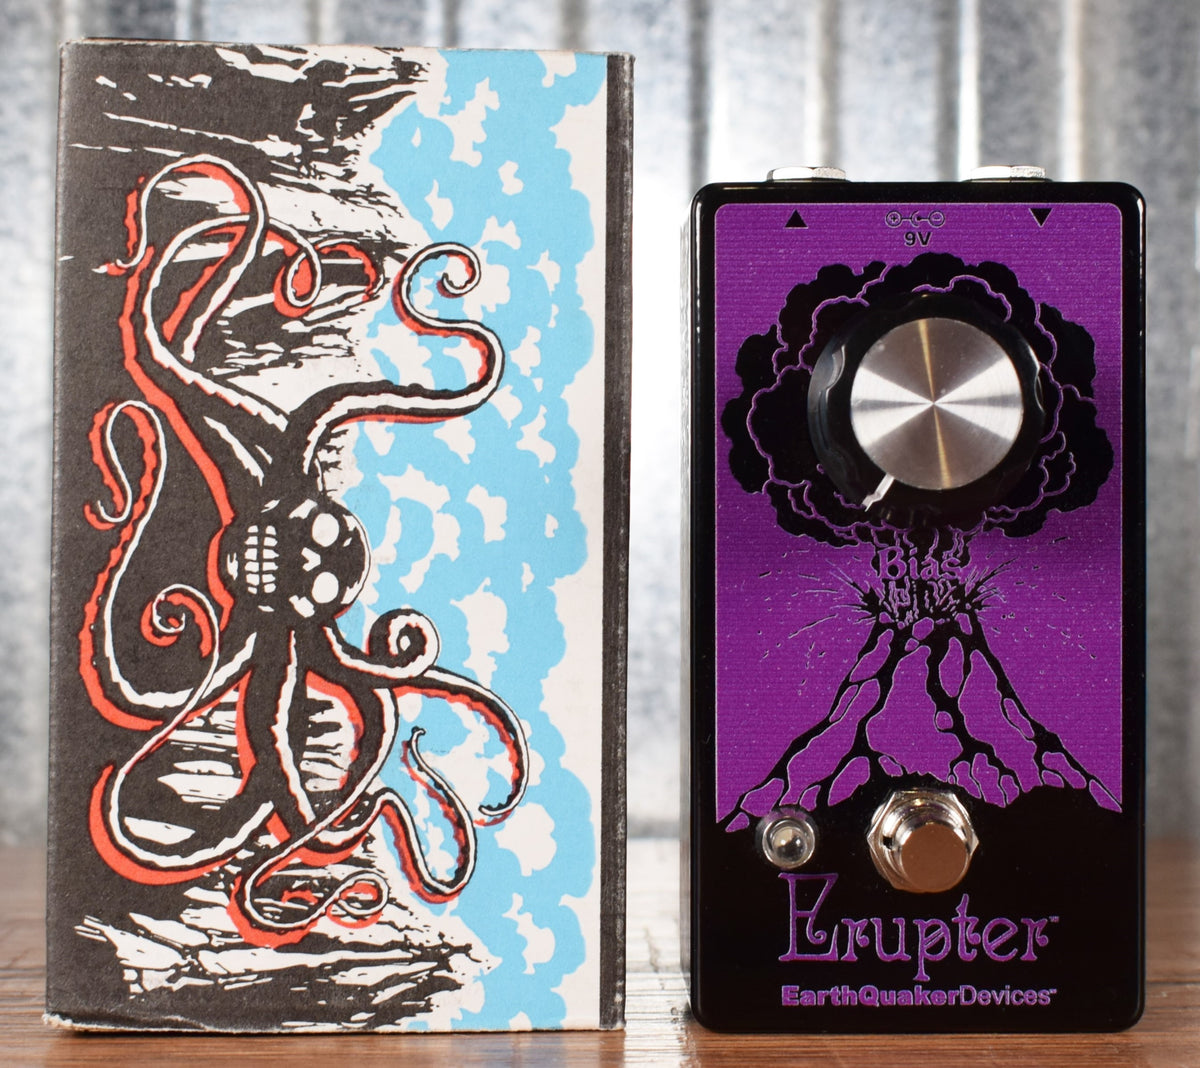 Take advantage of the latest Earthquaker Devices EQD Erupter Fuzz